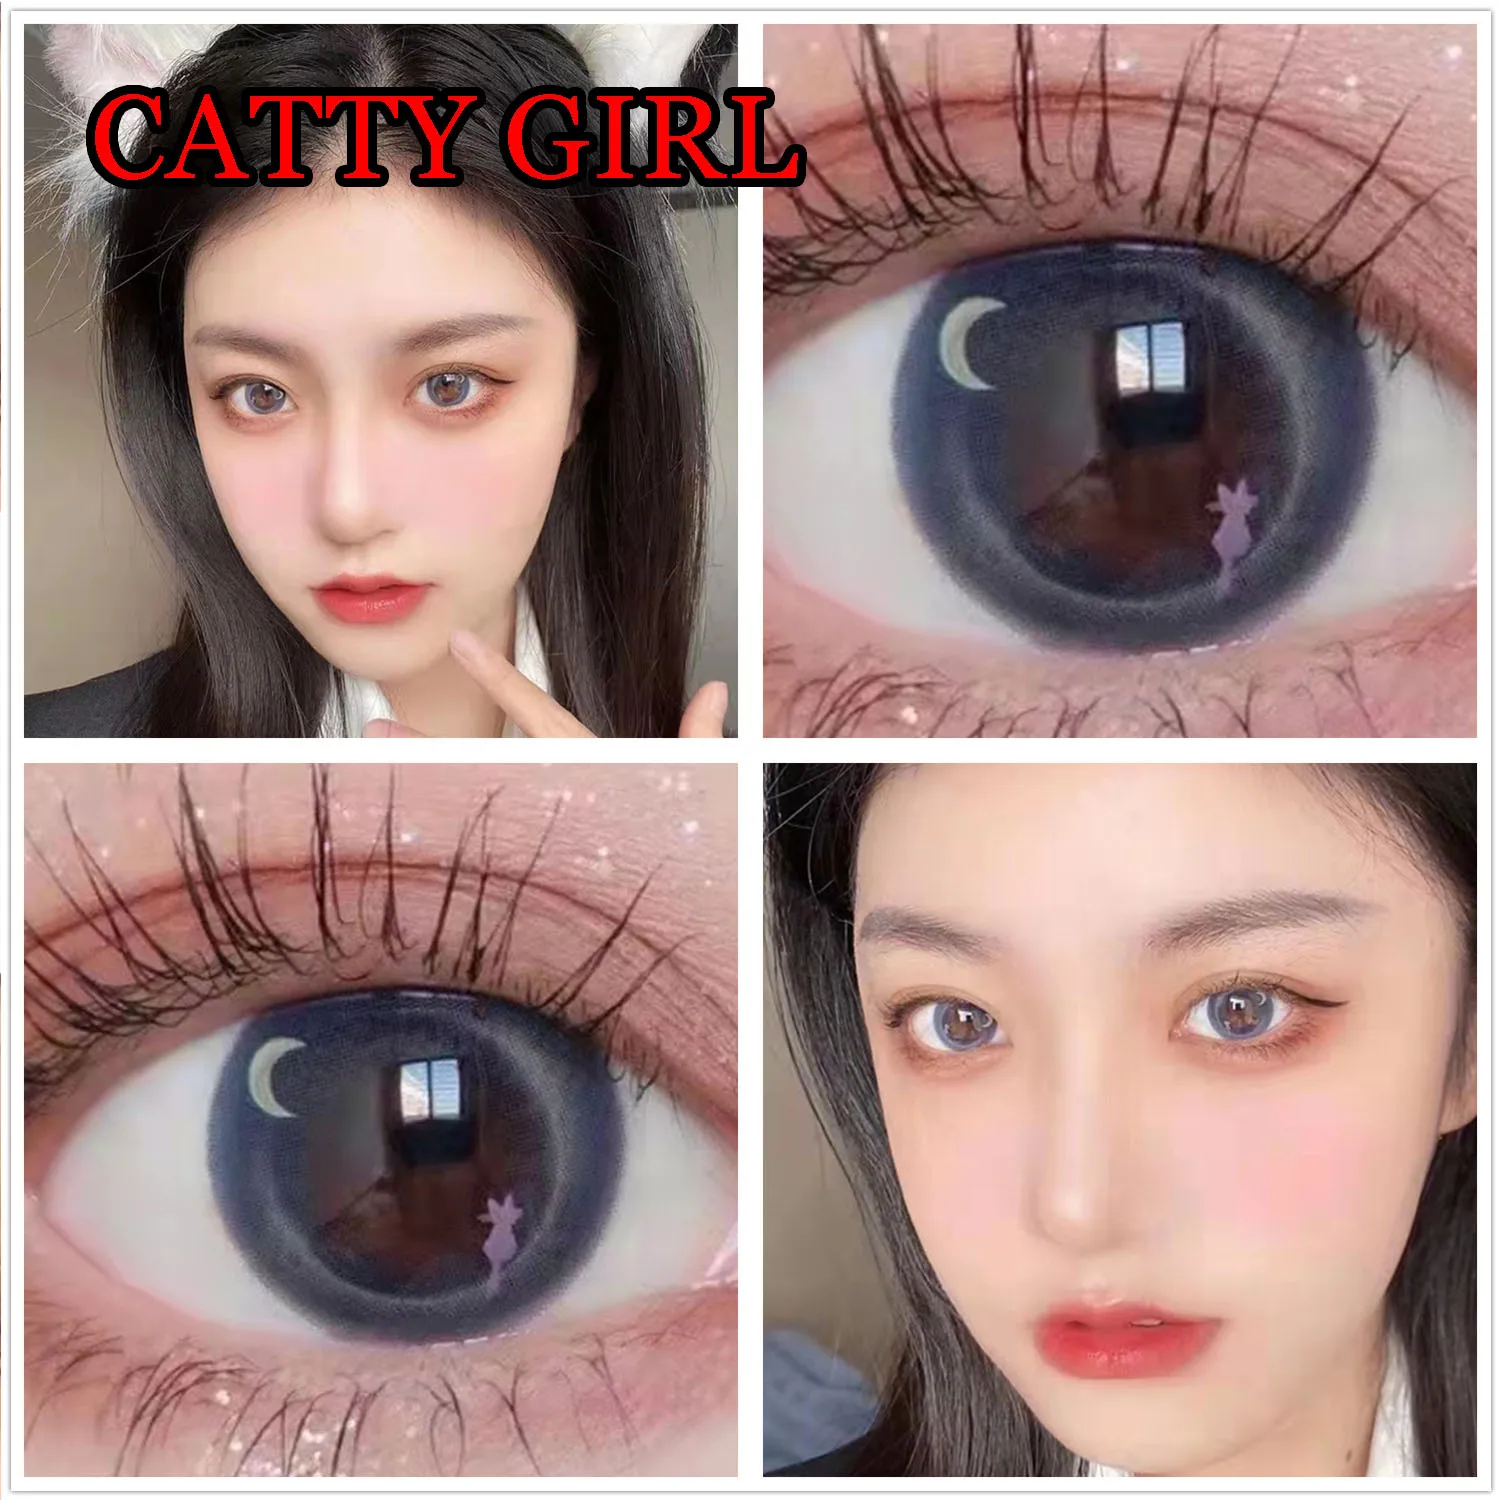 

Beauty Contact Lens Eye Color Makeup Eyes Coloured Contact Lenses for Eyes with Prescription линзы для глаз Catty Girl Violet